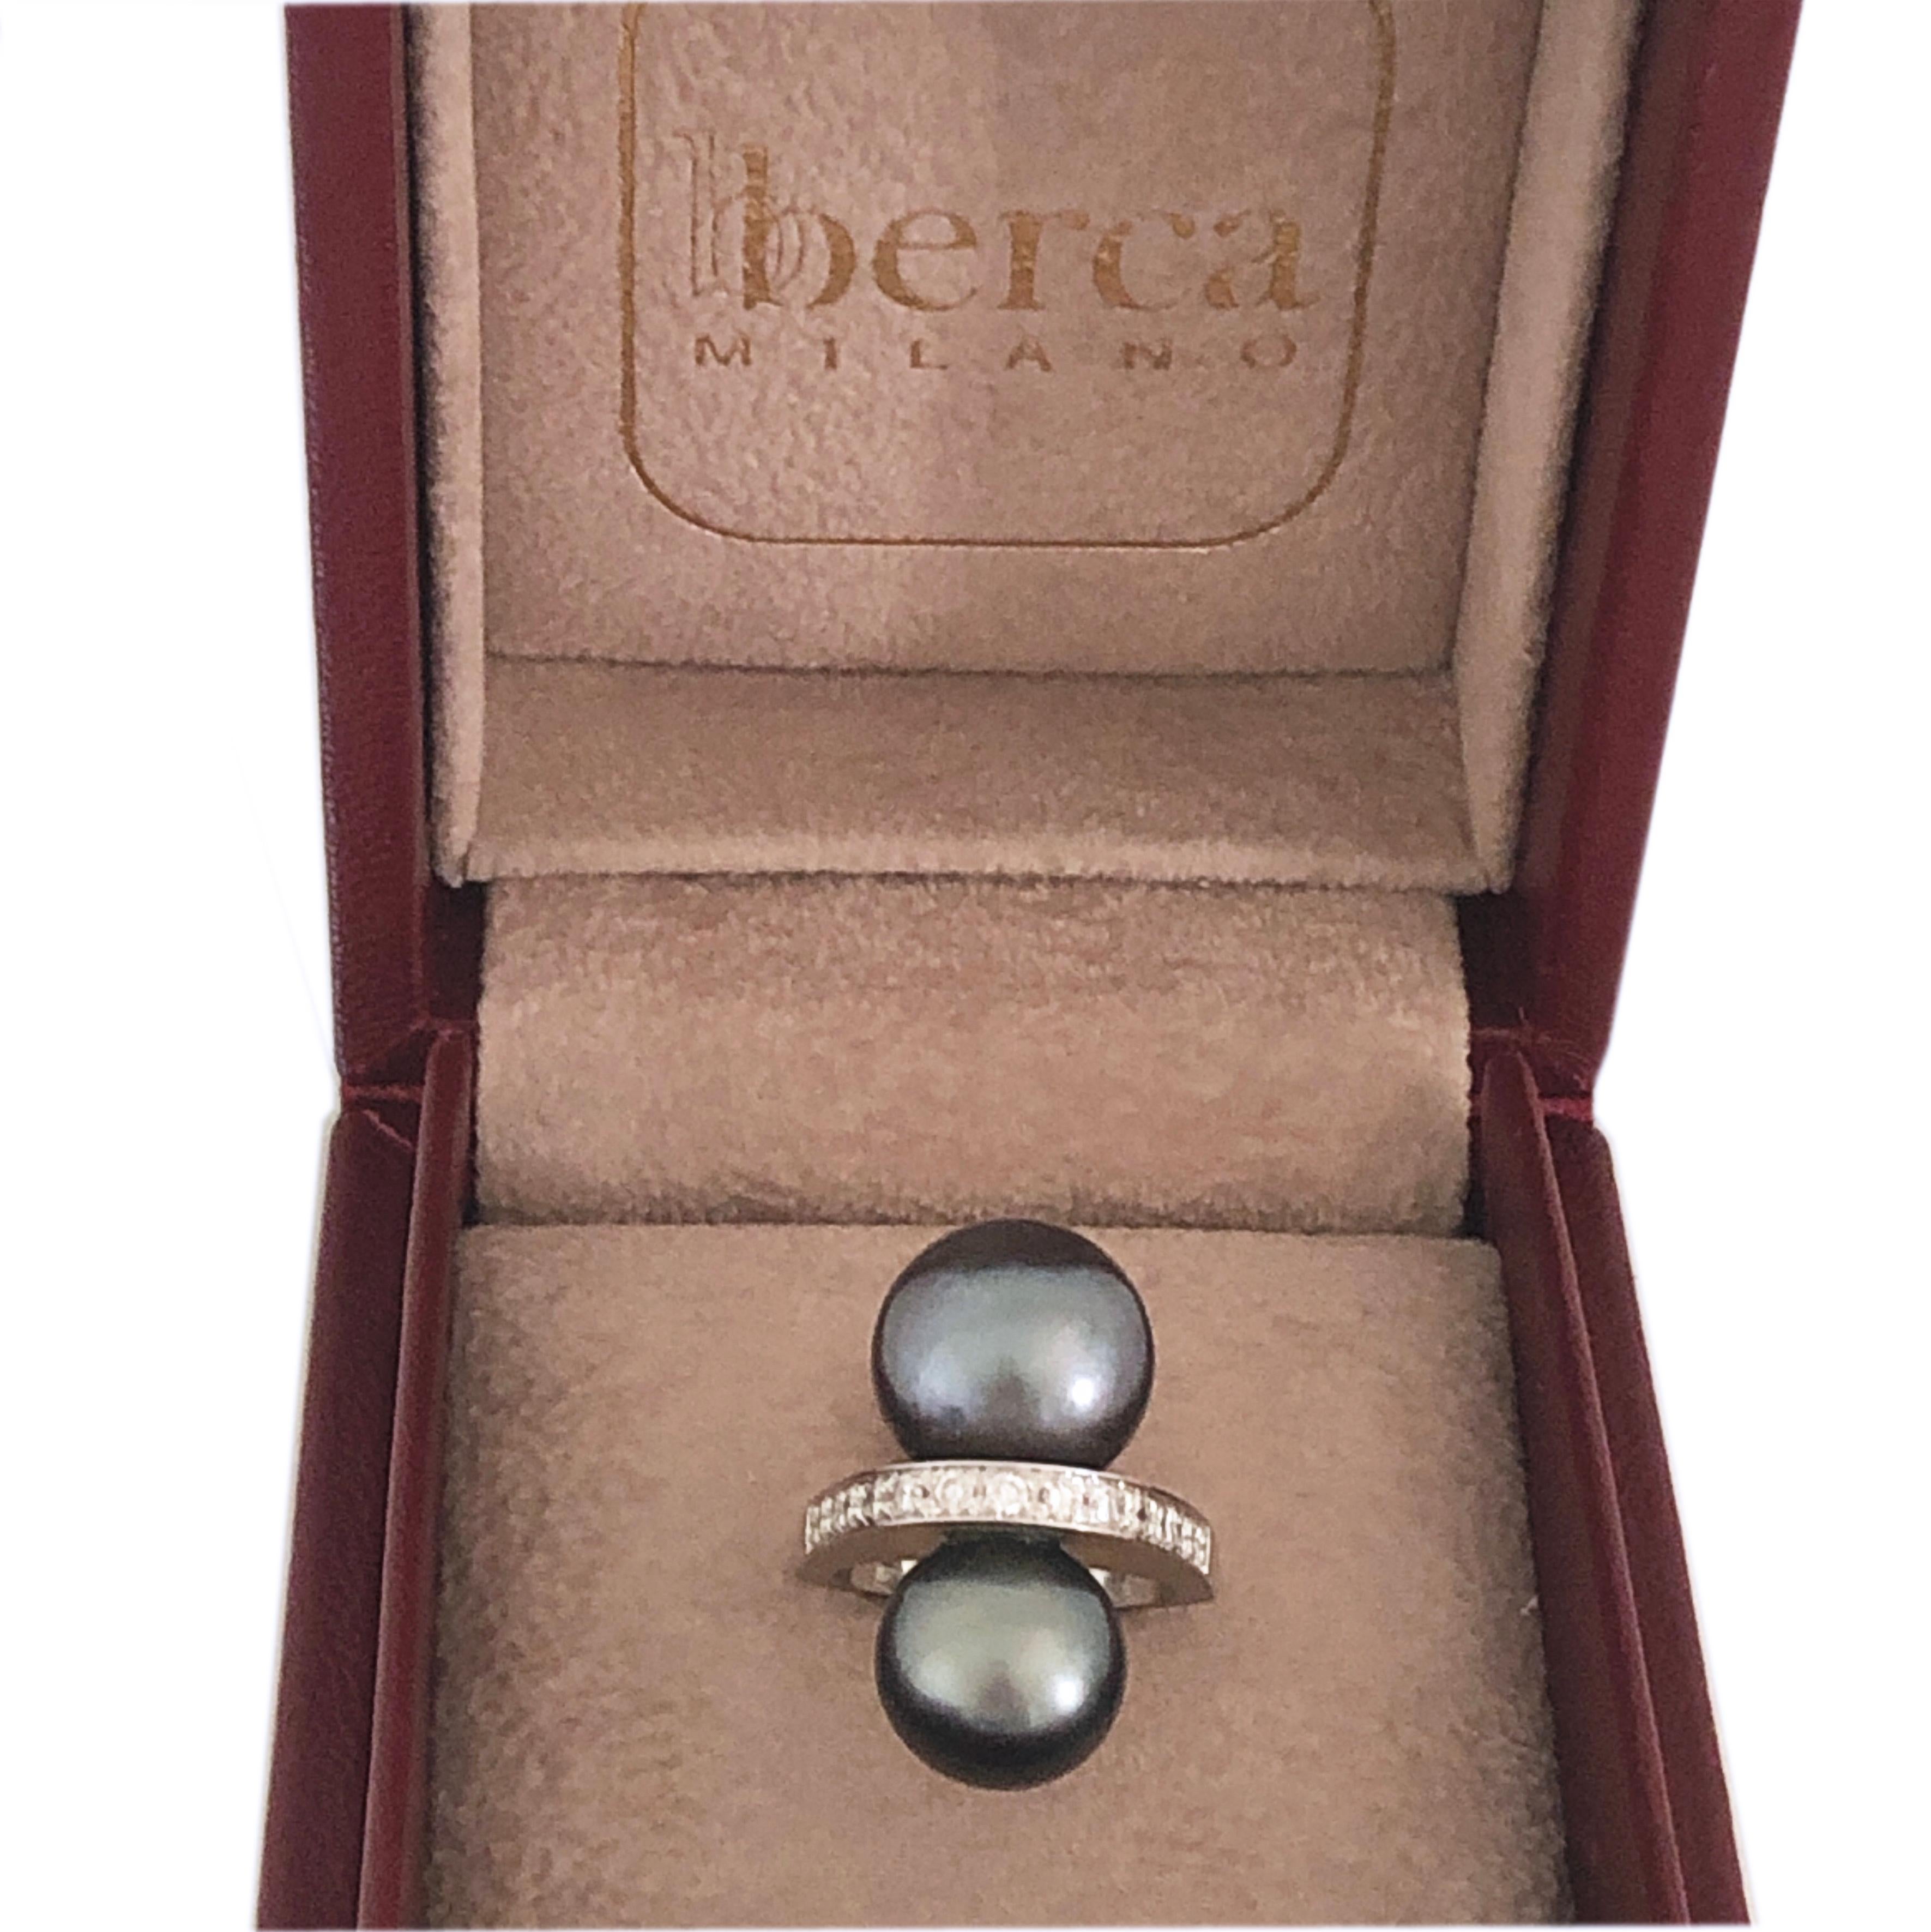 Chic, Timeless yet not Traditional Contemporary Toi et Moi Cocktail Ring featuring two Natural Velvety Black Tahitian Pearl(diameter 0.528 and 0.464 inches) in a Diamond White Gold Setting; a fitted burgundy leather case completes this unique